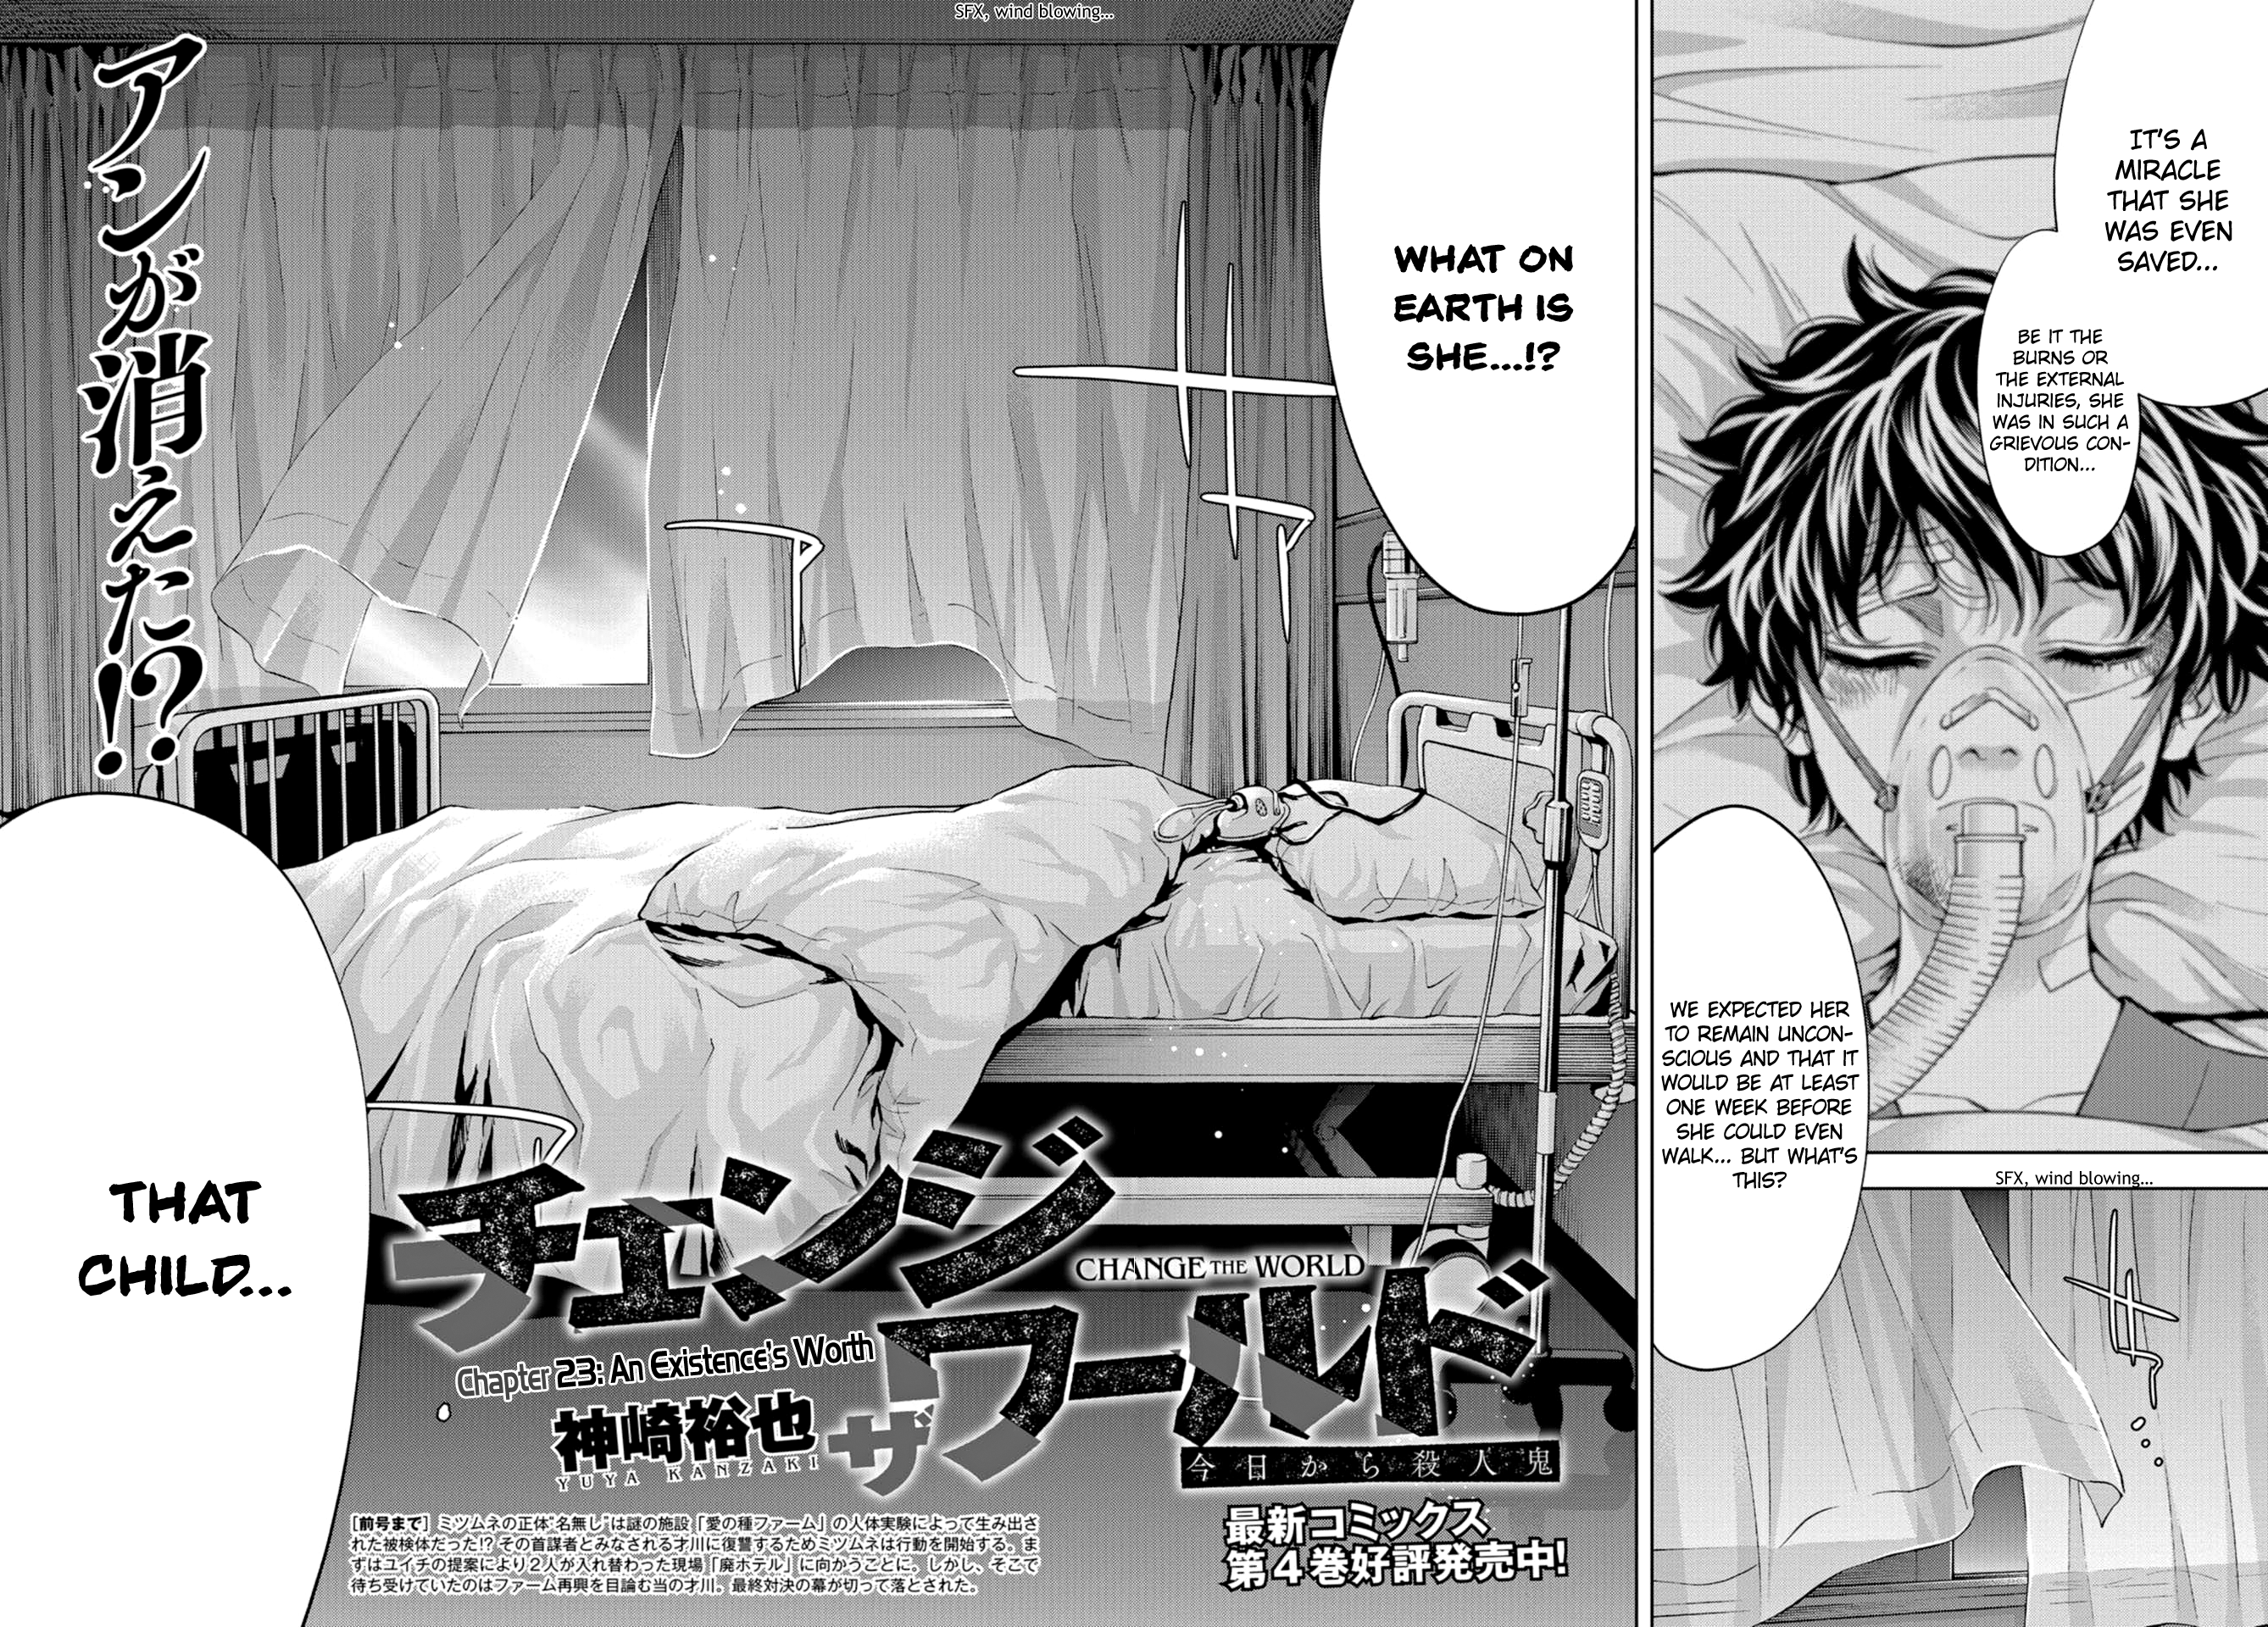 Change The World (Kanzaki Yuuya) Vol.5 Chapter 23: An Existence's Worth - Picture 2